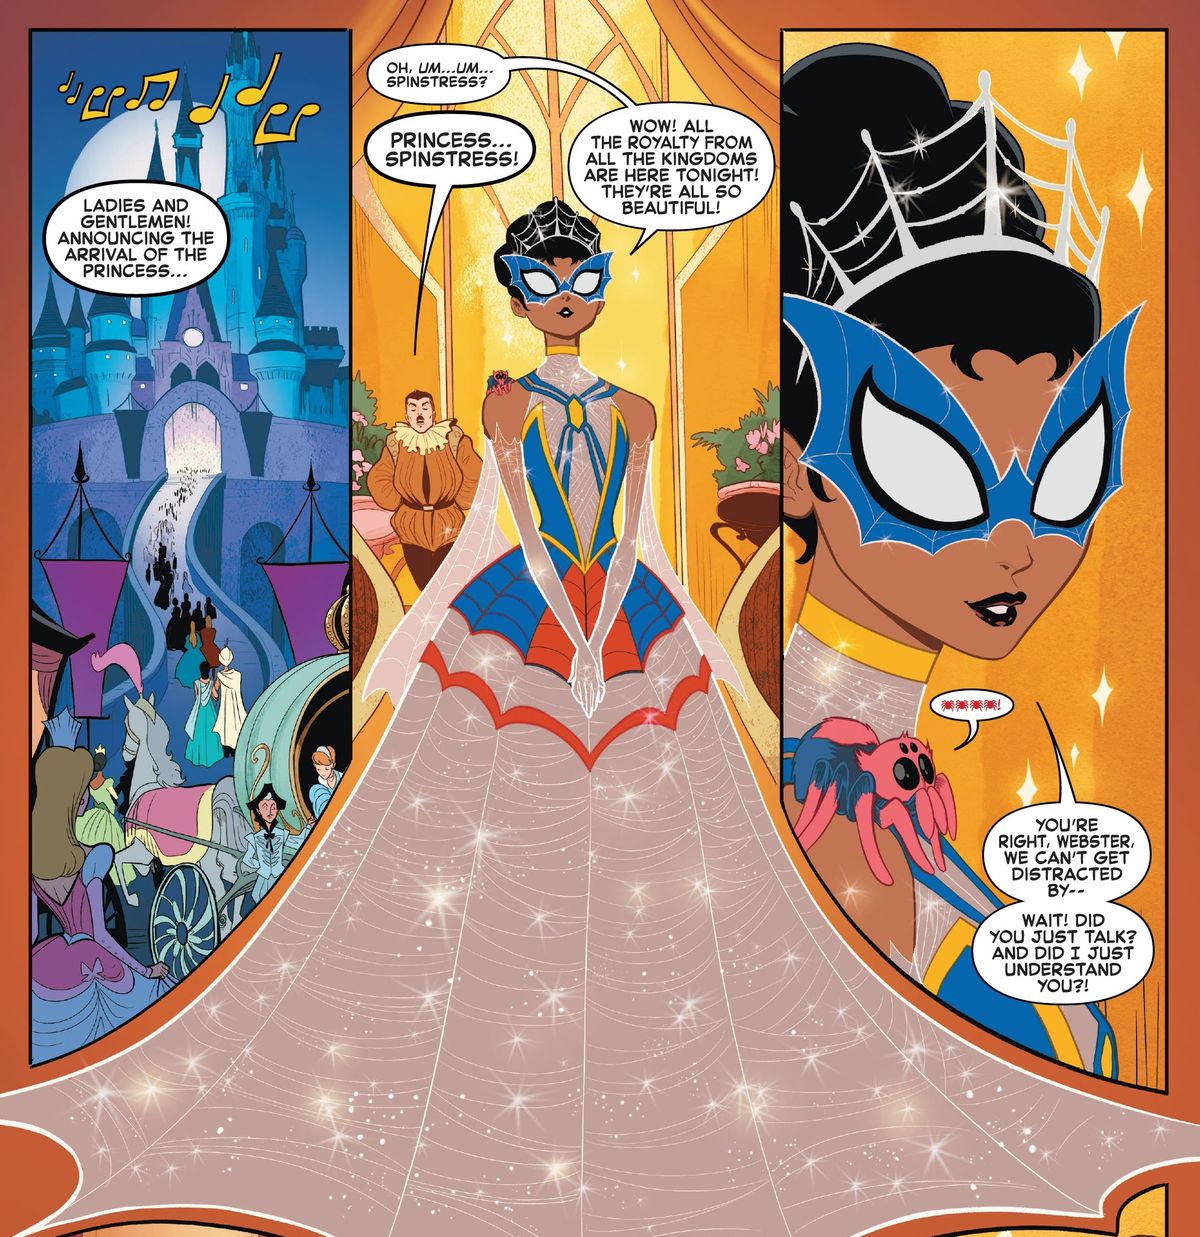 Princess Spinstress is introduced at a medieval ball, in her red and blue dress with his glittering web skirt in Edge of Spider-Verse #4 (2022).